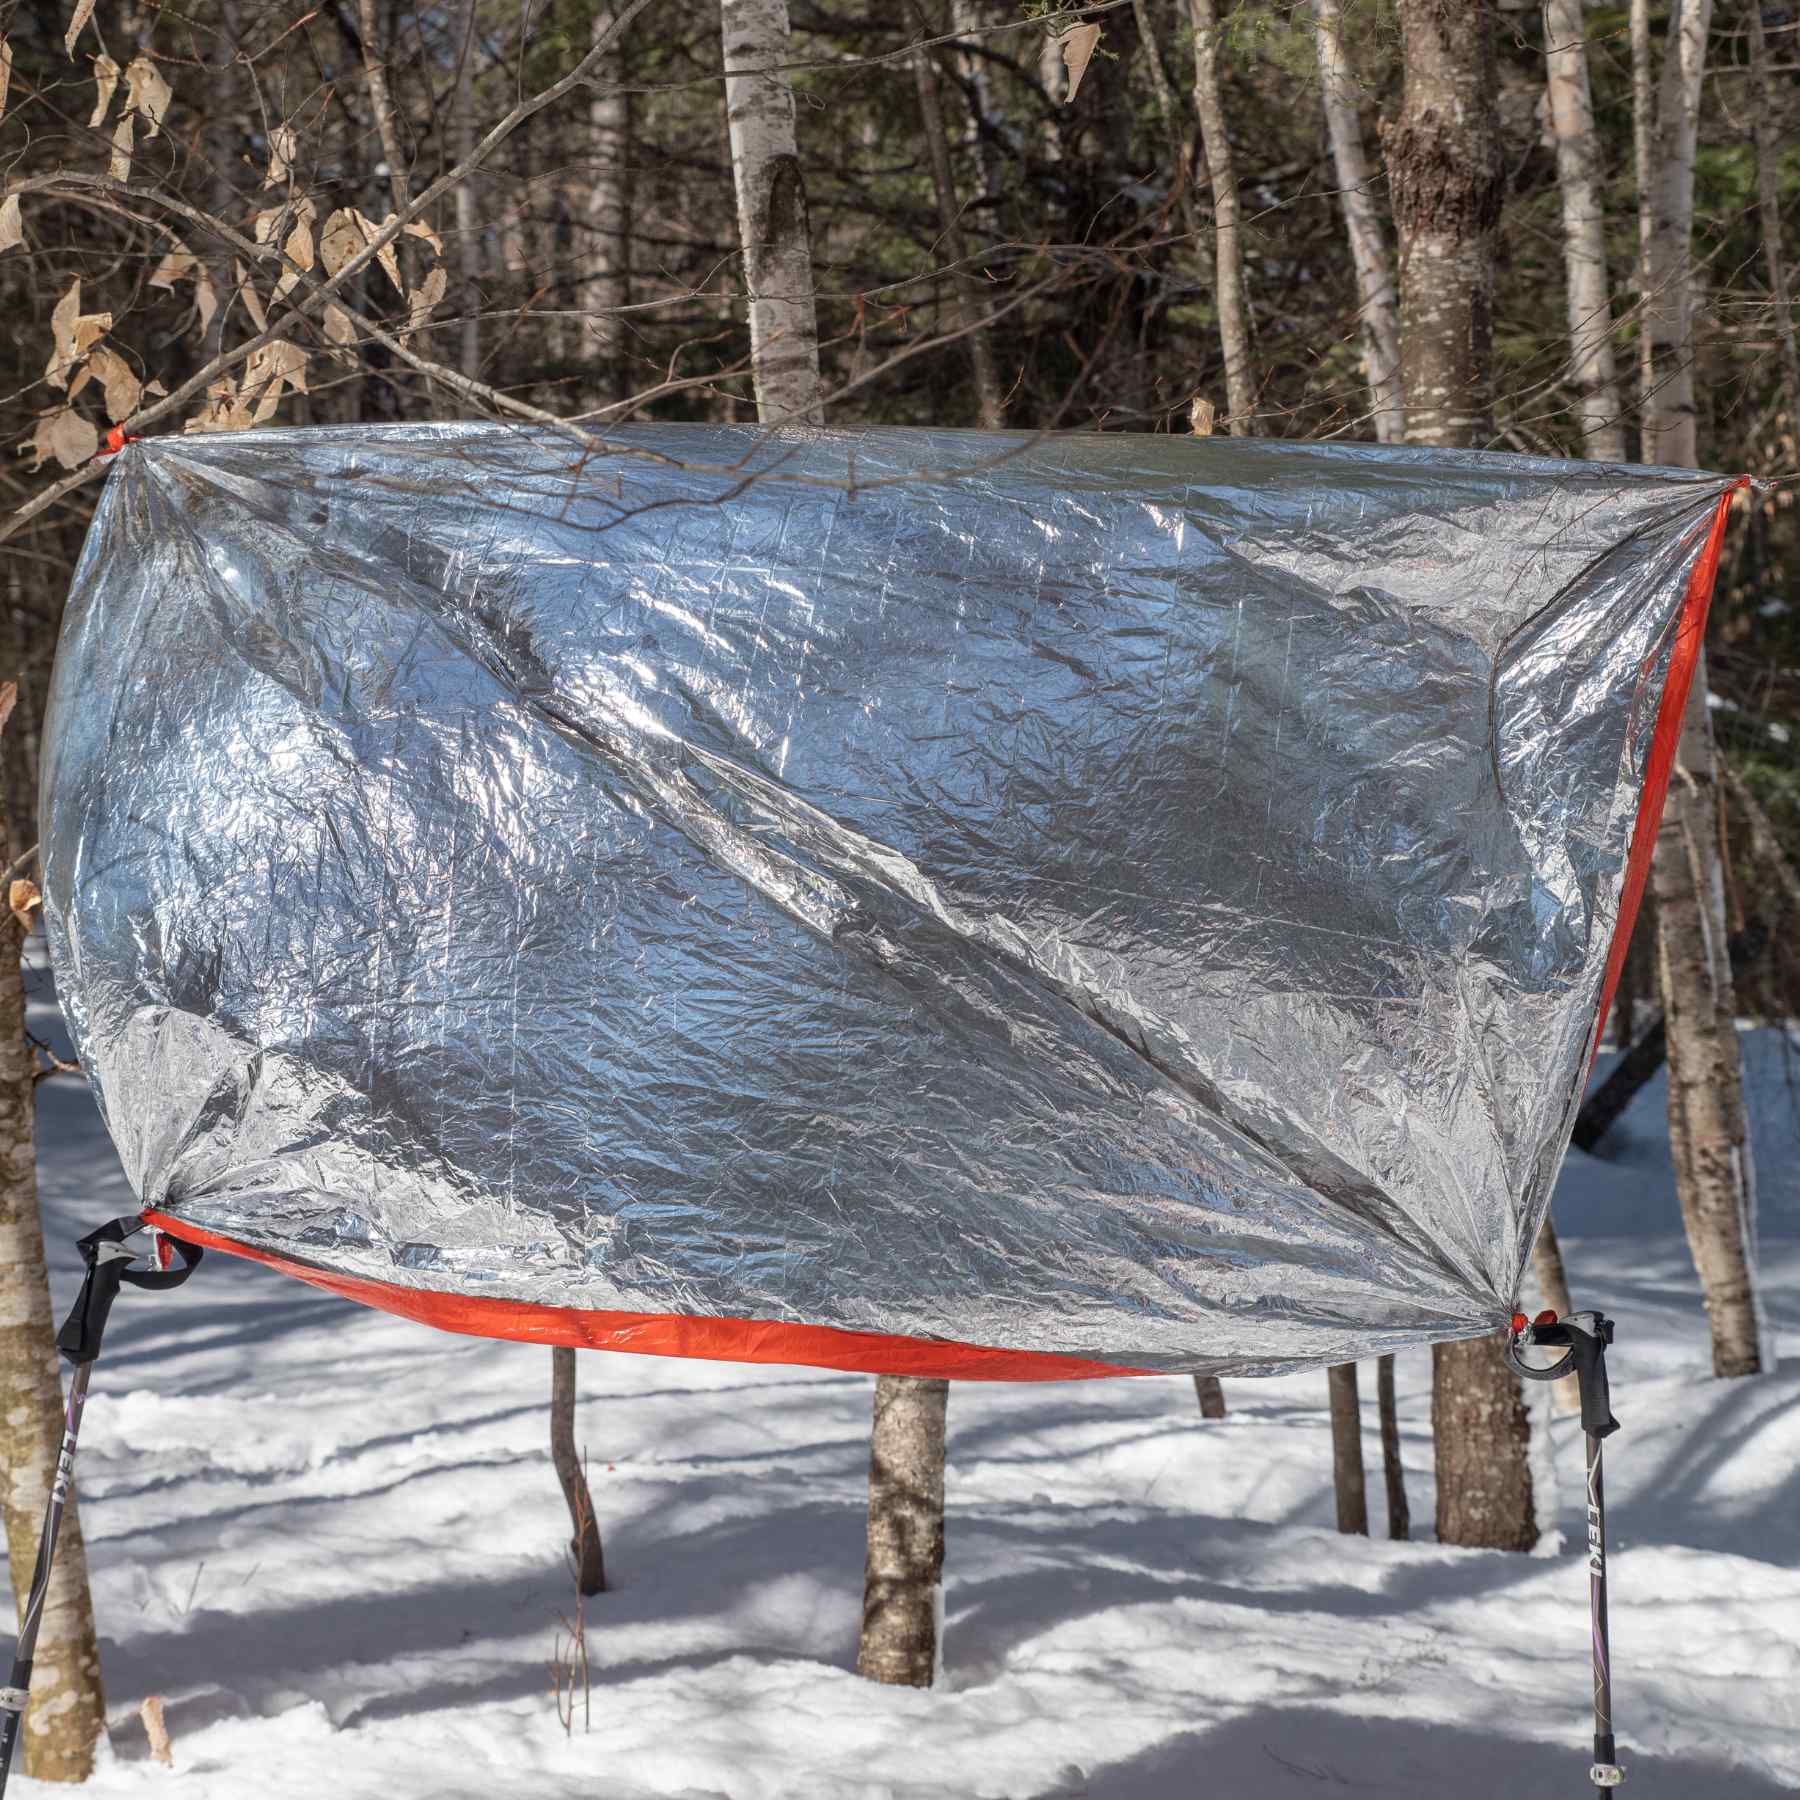 Emergency Blanket inside out used as a shelter